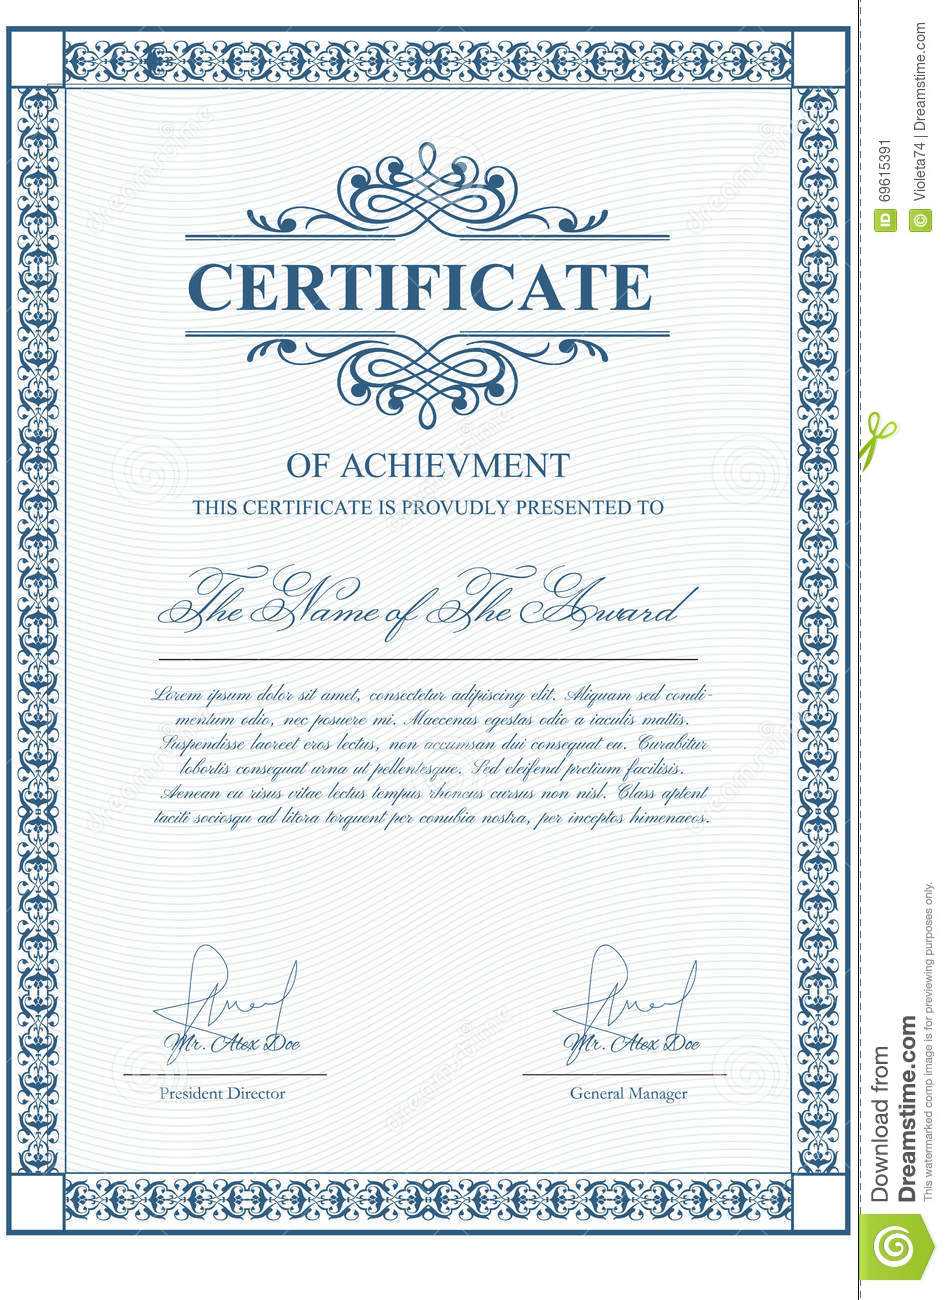 Certificate Template With Guilloche Elements. Stock Vector With Regard To Validation Certificate Template